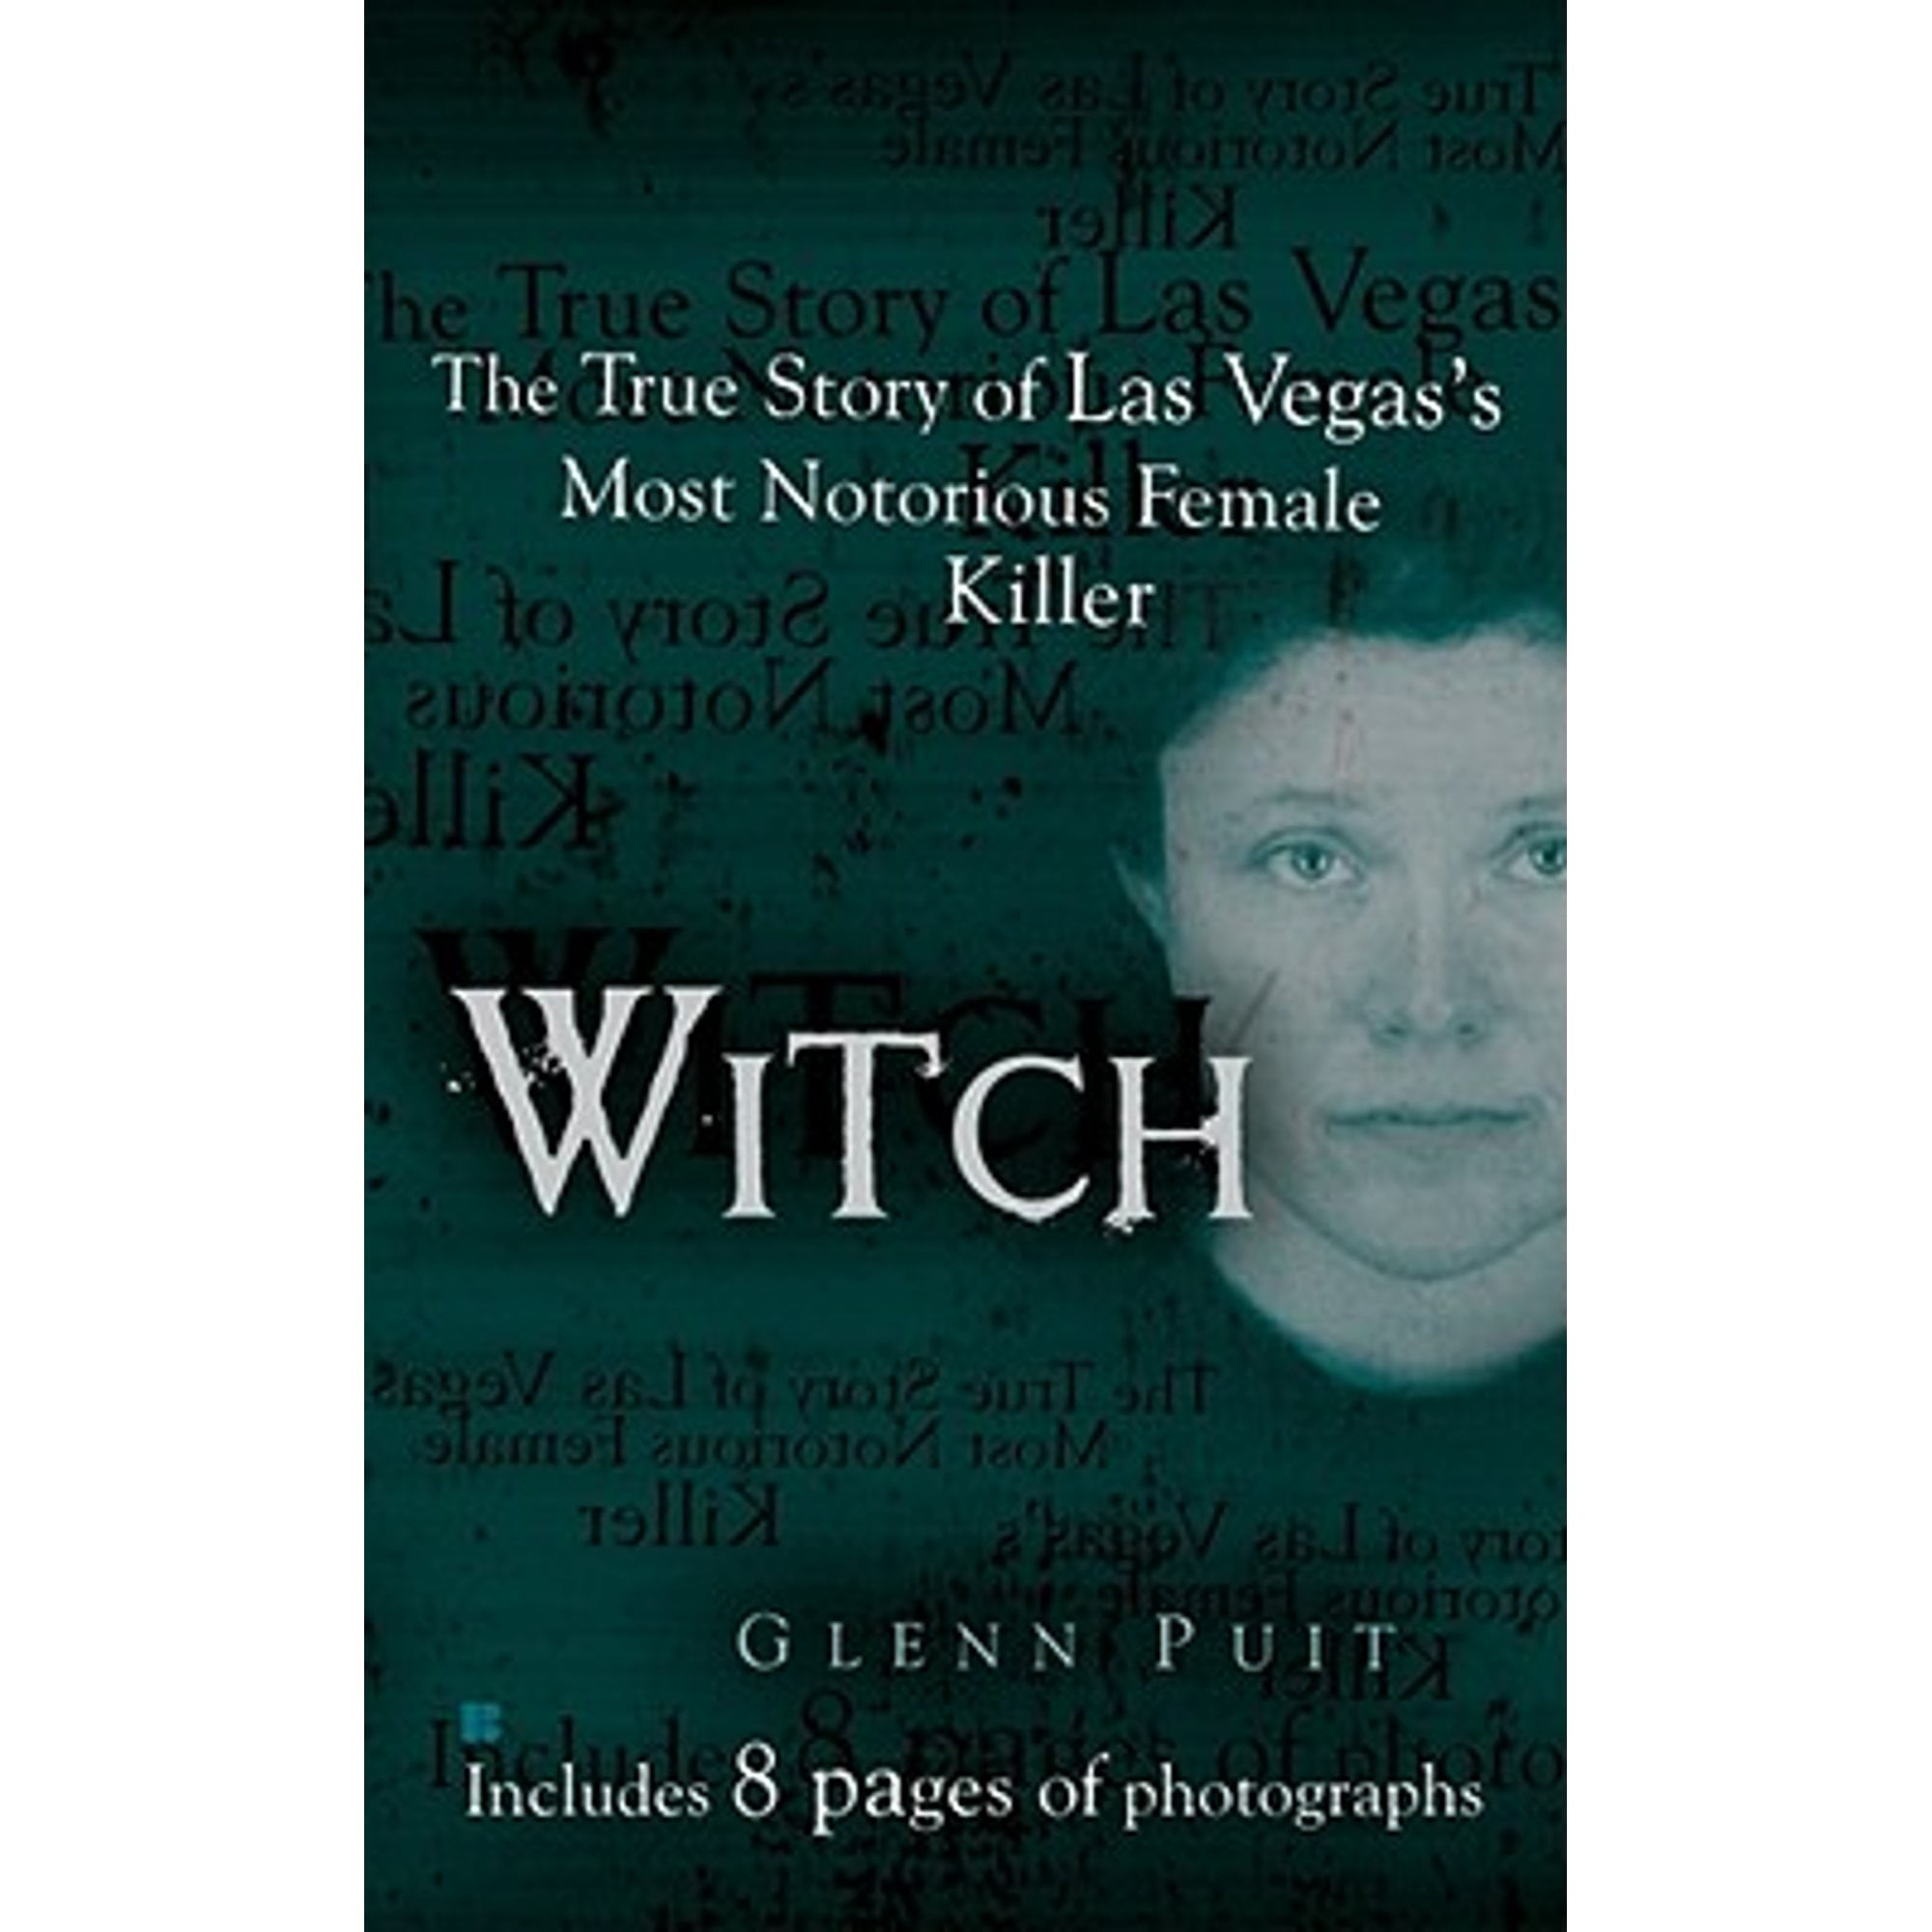 Witch: The True Story of Las Vegas' Most Notorious Female Killer (Pre-Owned  Paperback 9780425207192) by Glenn Puit 